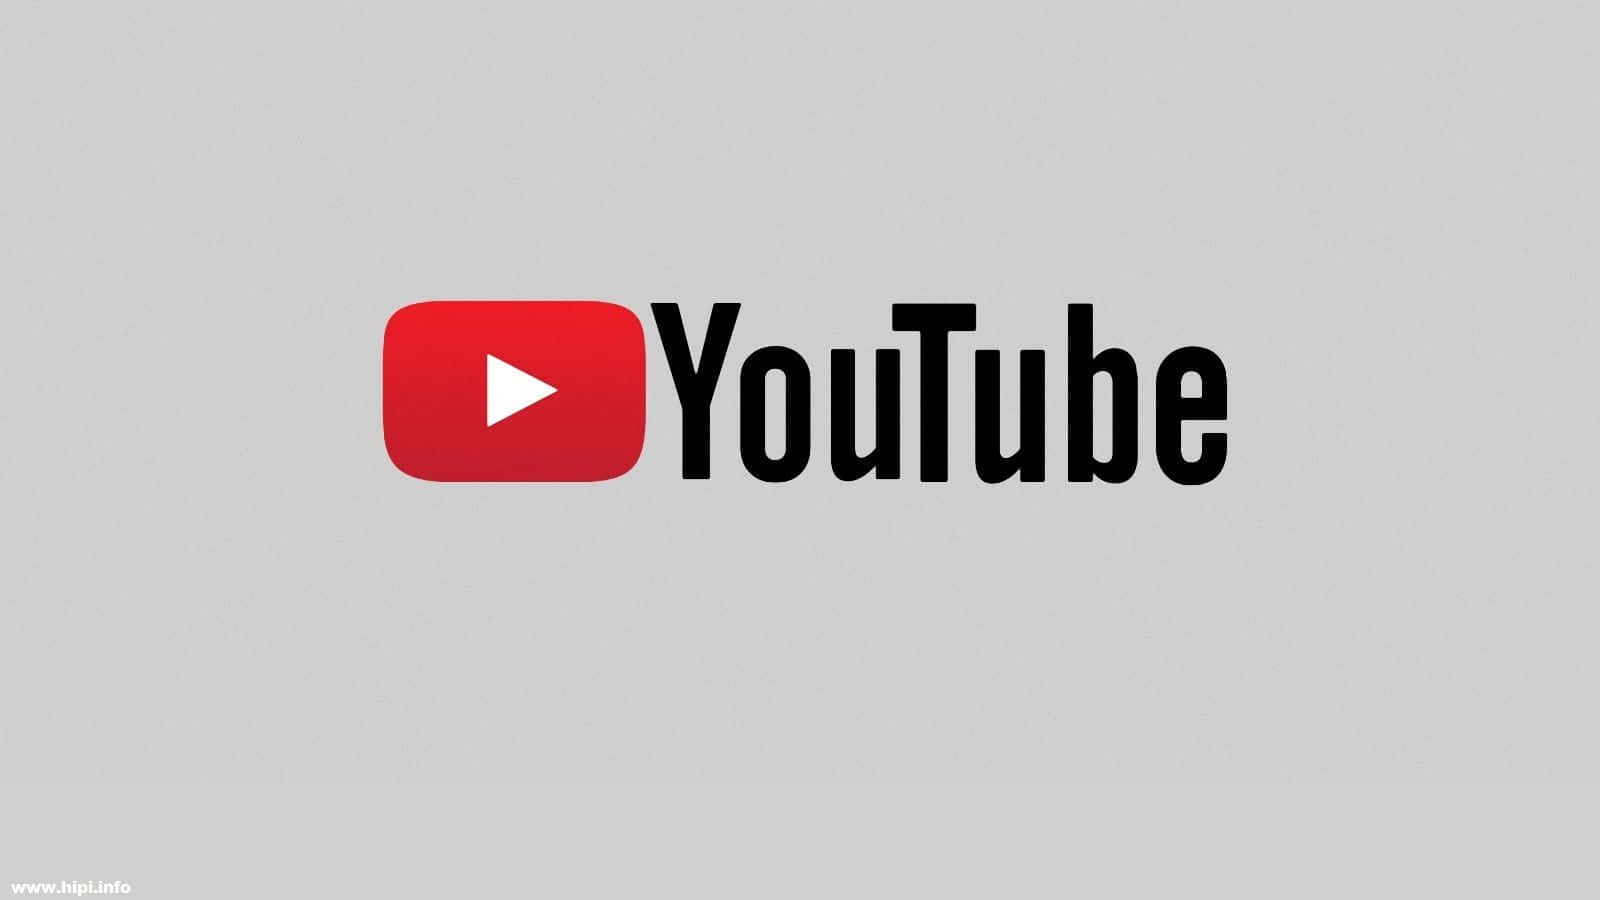 Download Youtube Logo in Black Background | Wallpapers.com